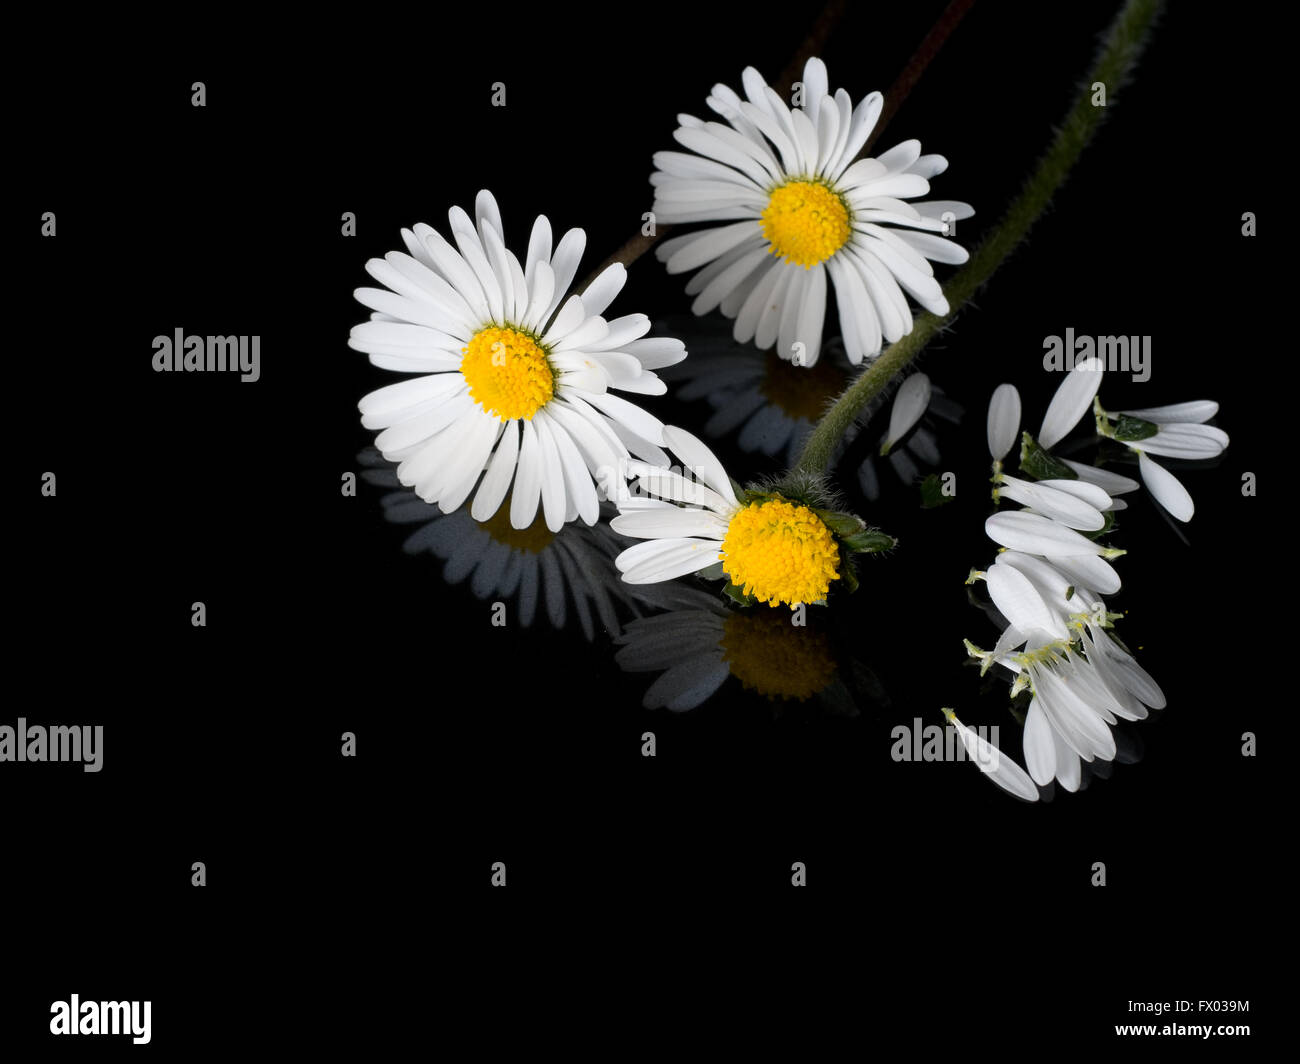 Daisies and petals on shiny black with reflection. Innocence concept. Loves me, loves me not childhood game. Stock Photo